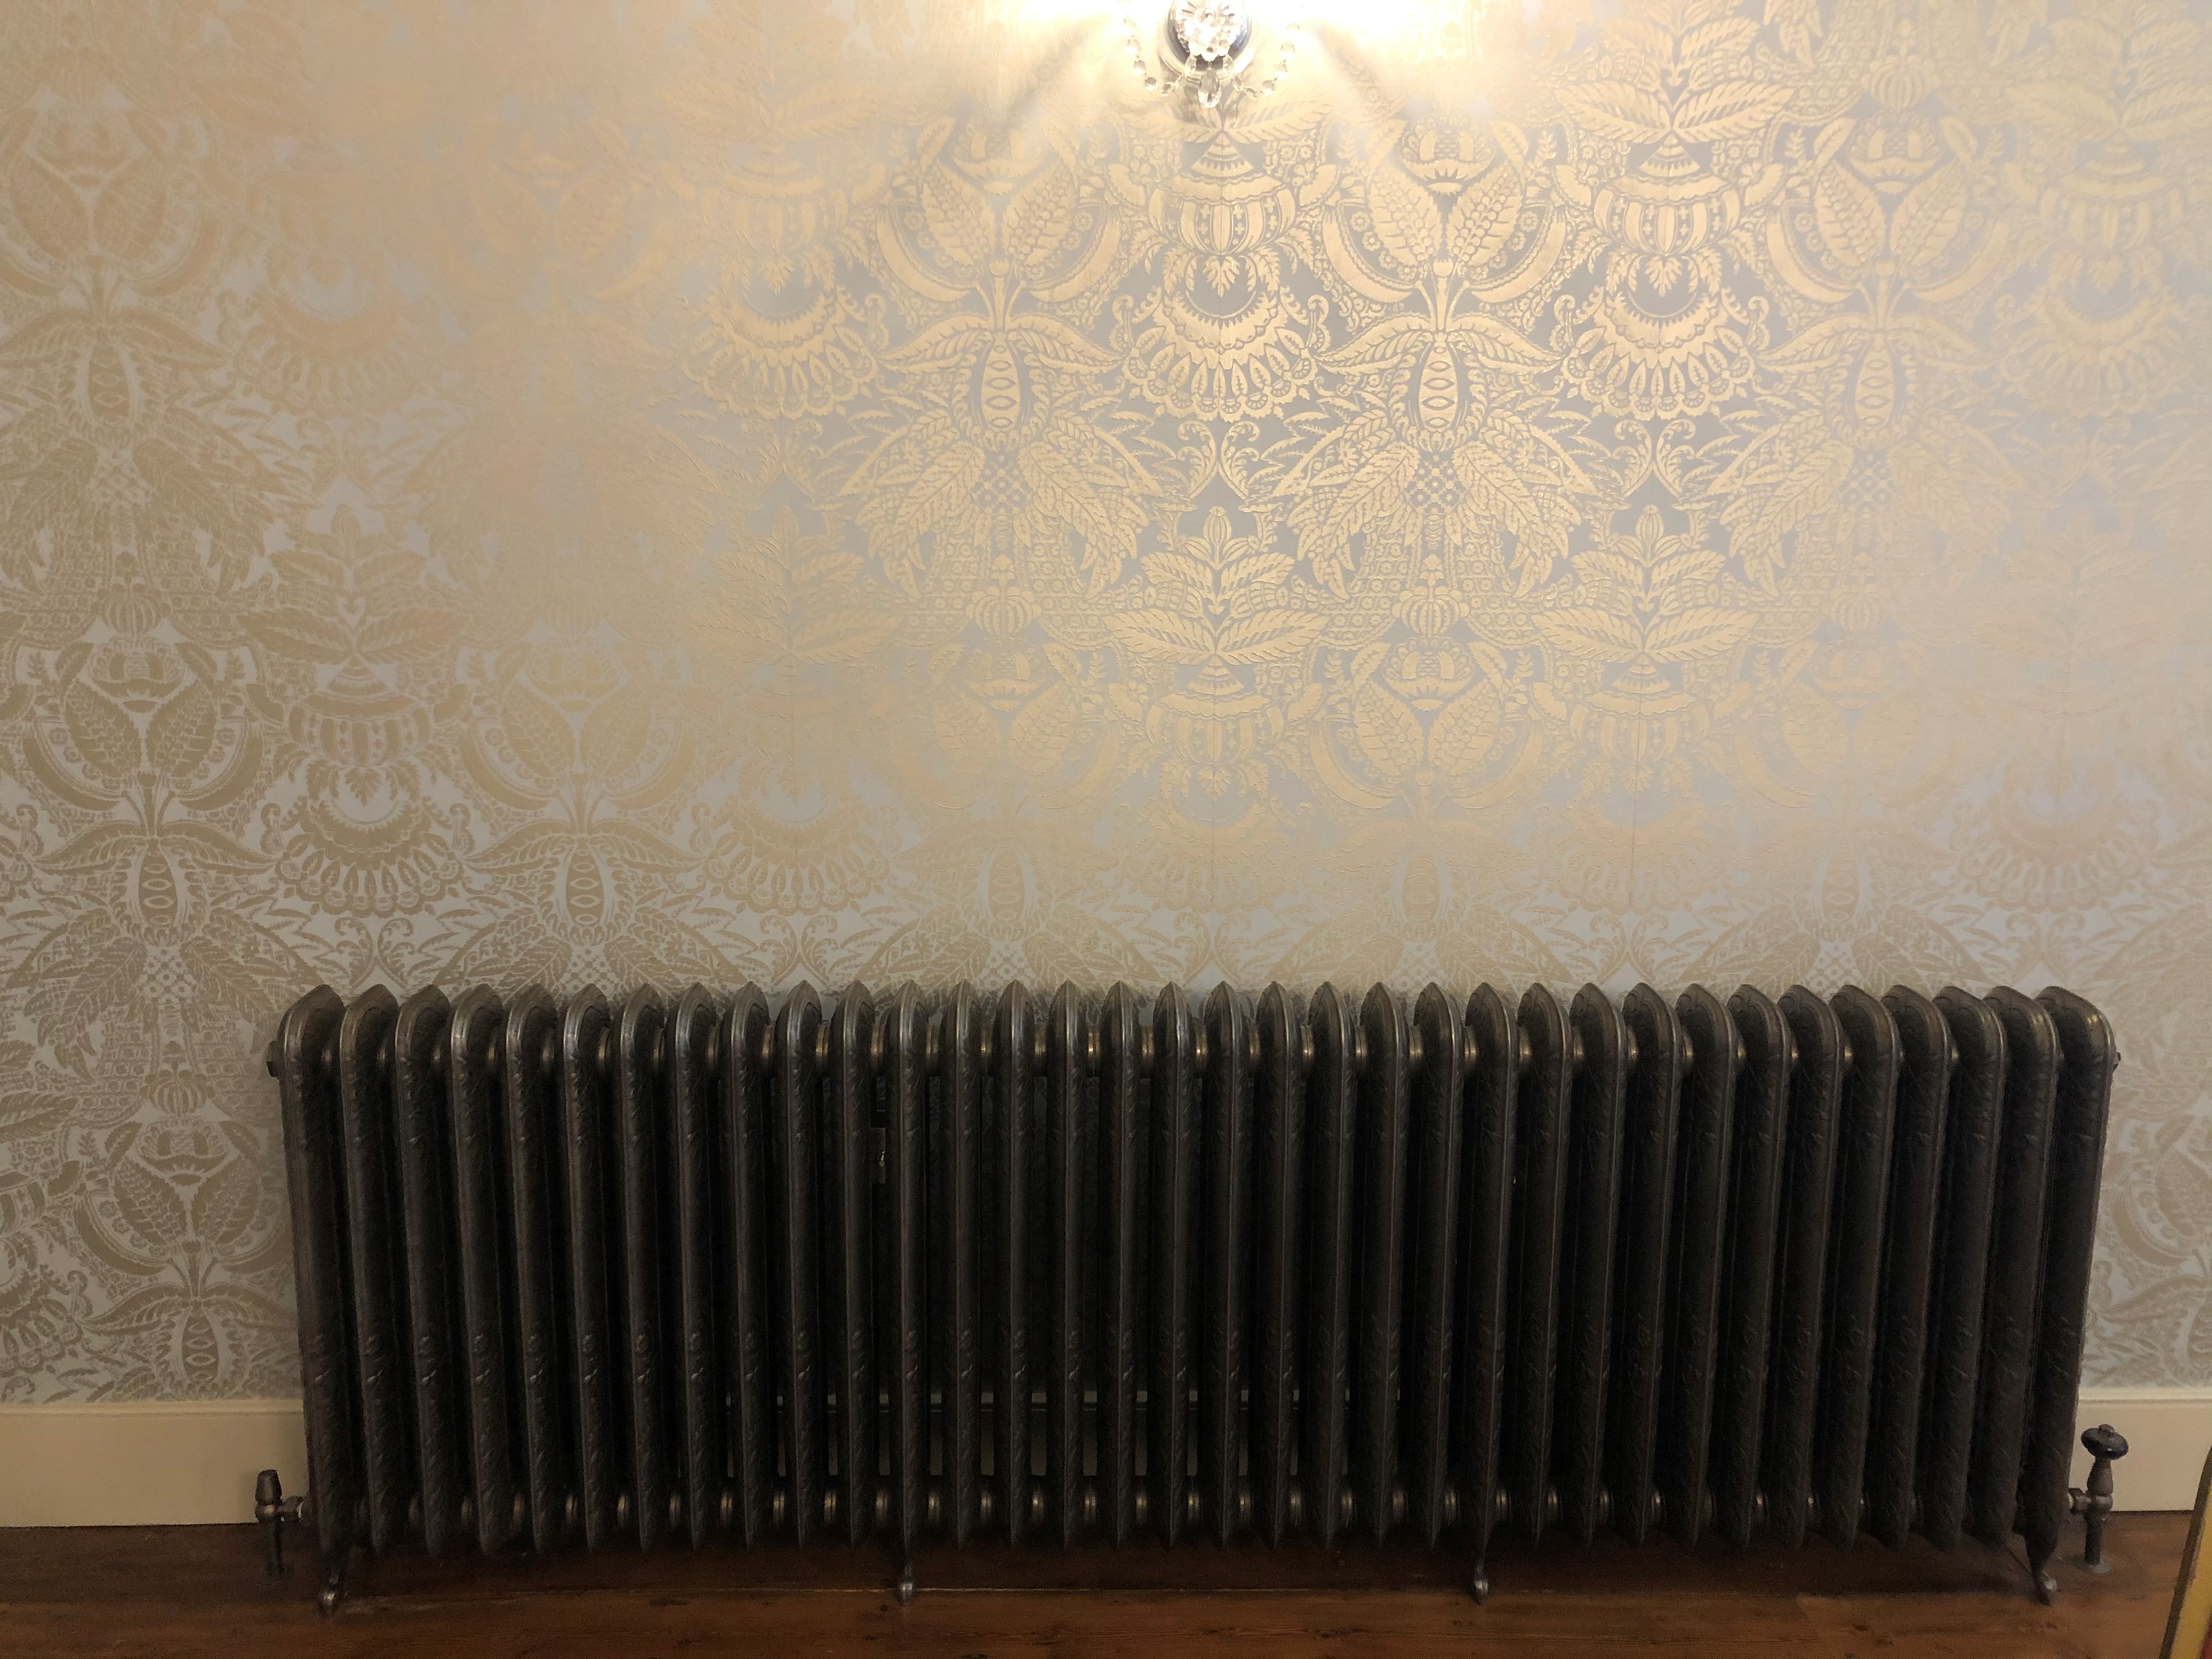 Carron Daisy Hand Burnished Cast Iron Radiator Suitable For Large Victorian Rooms